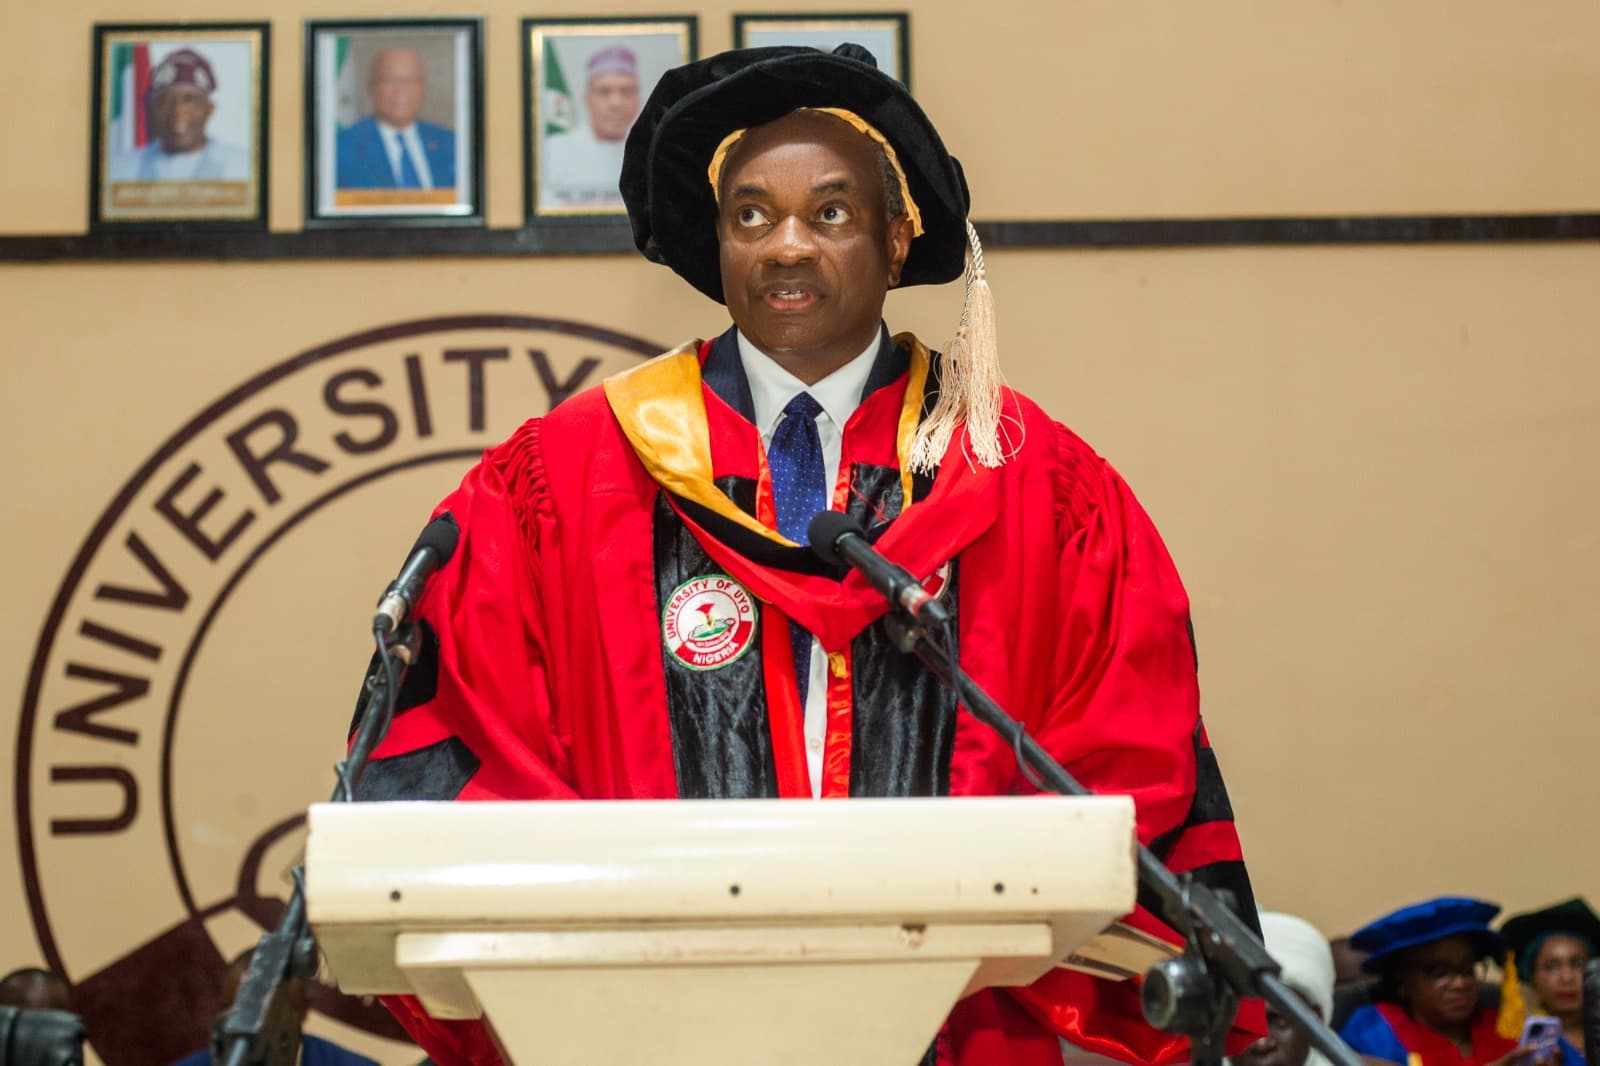 UNIUYO Honours Inoyo With Doctorate